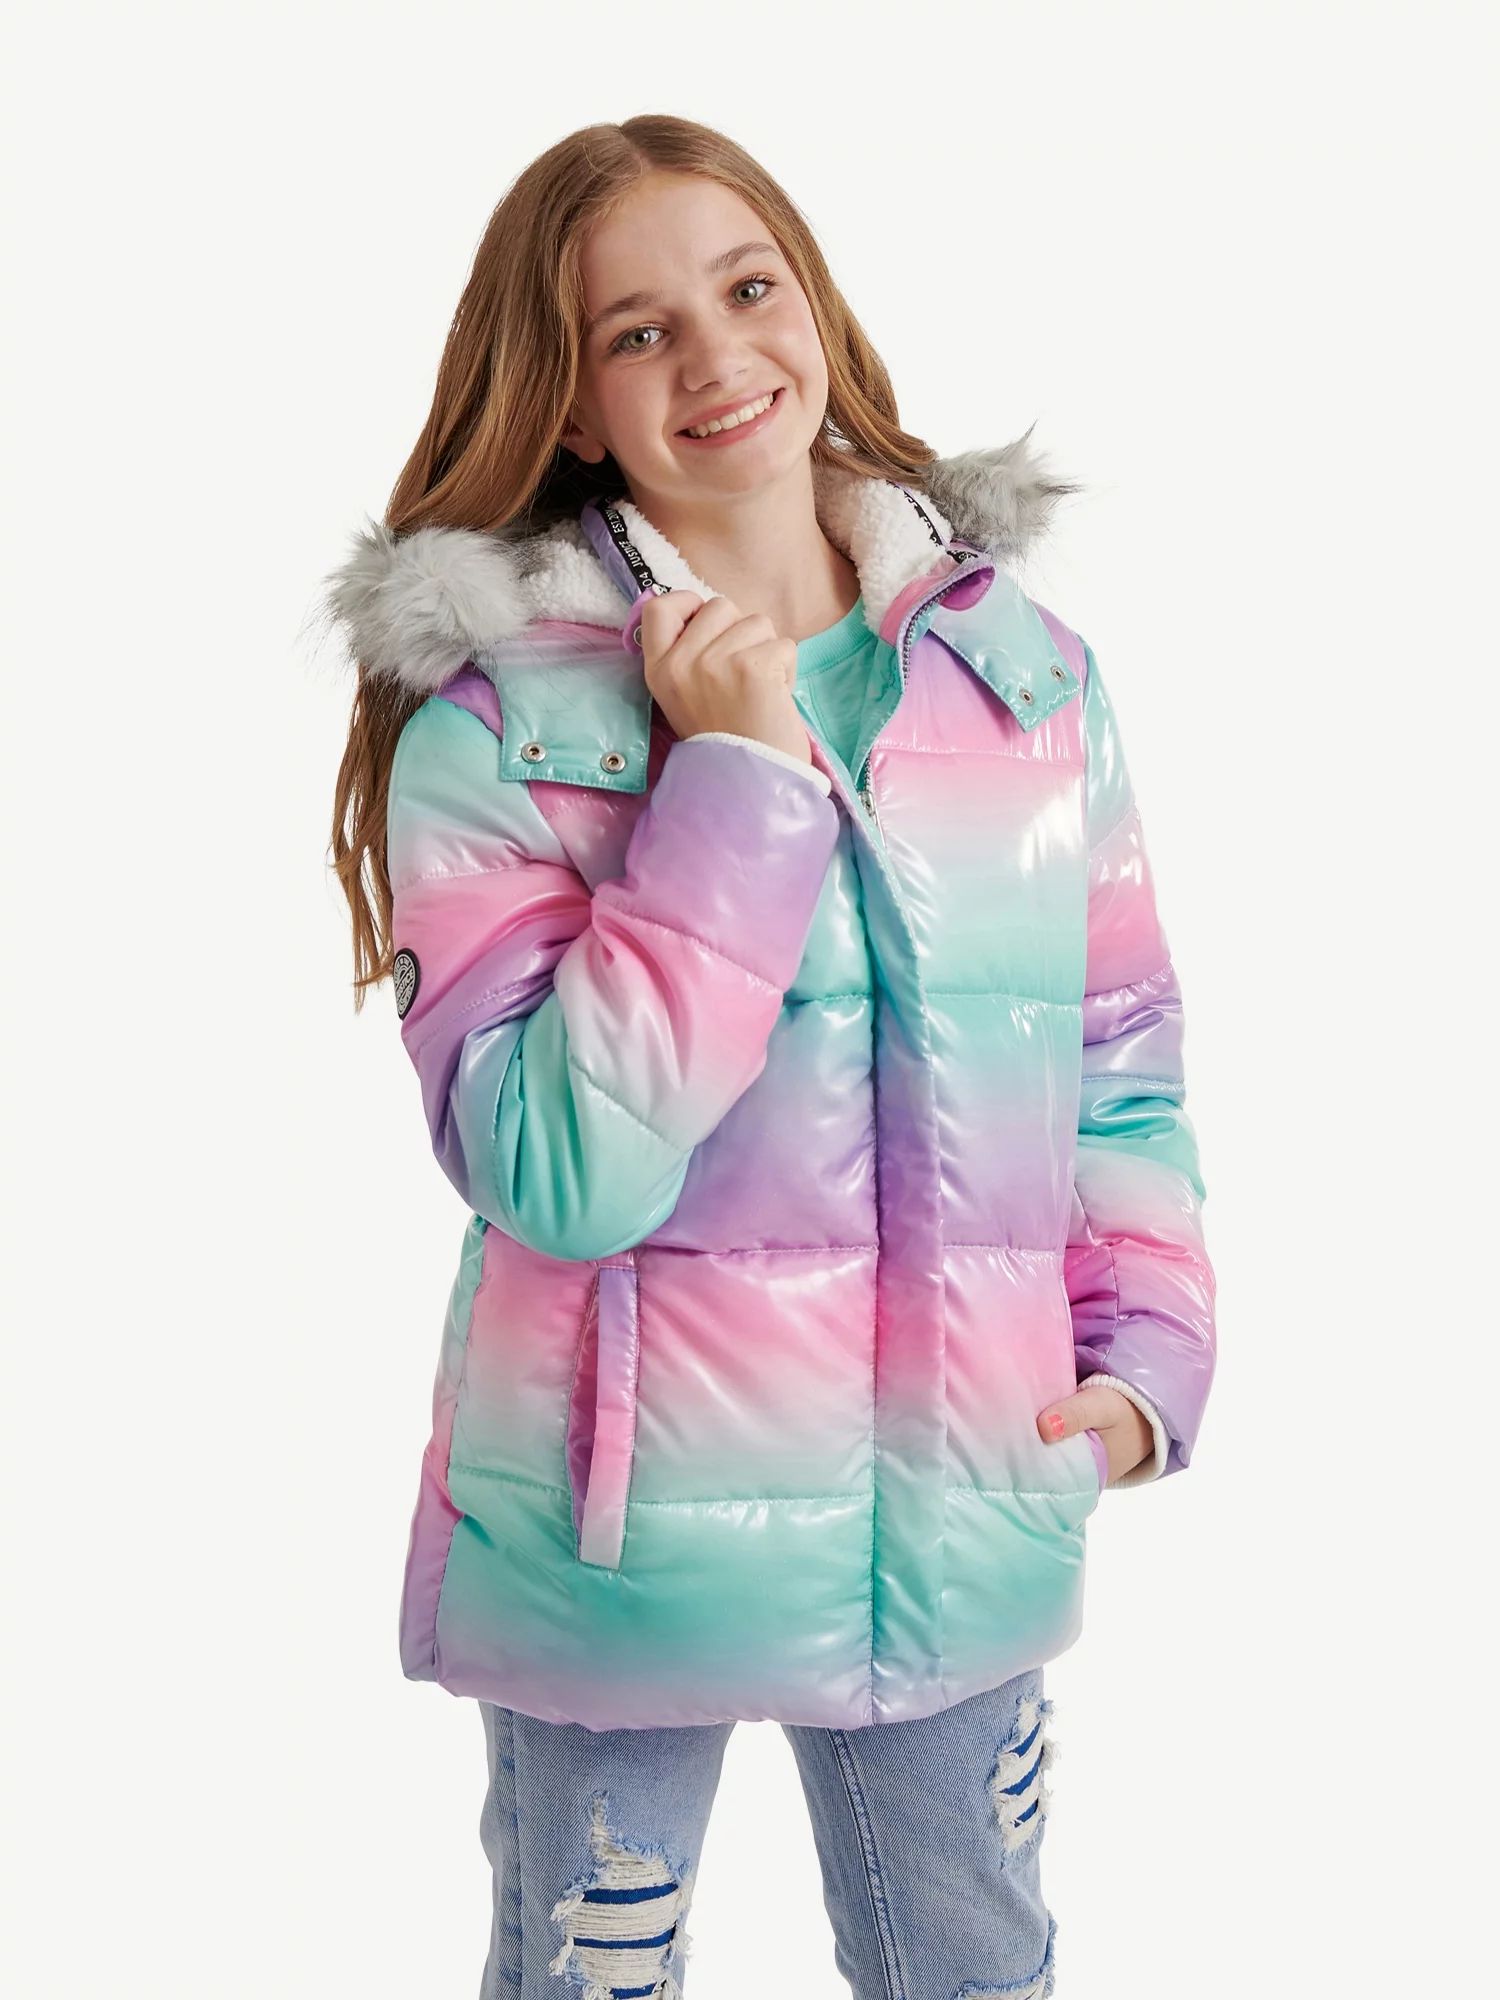 Justice Girls Puffer Jacket with Faux Fur Lined Hood, Sizes 5-18 | Walmart (US)